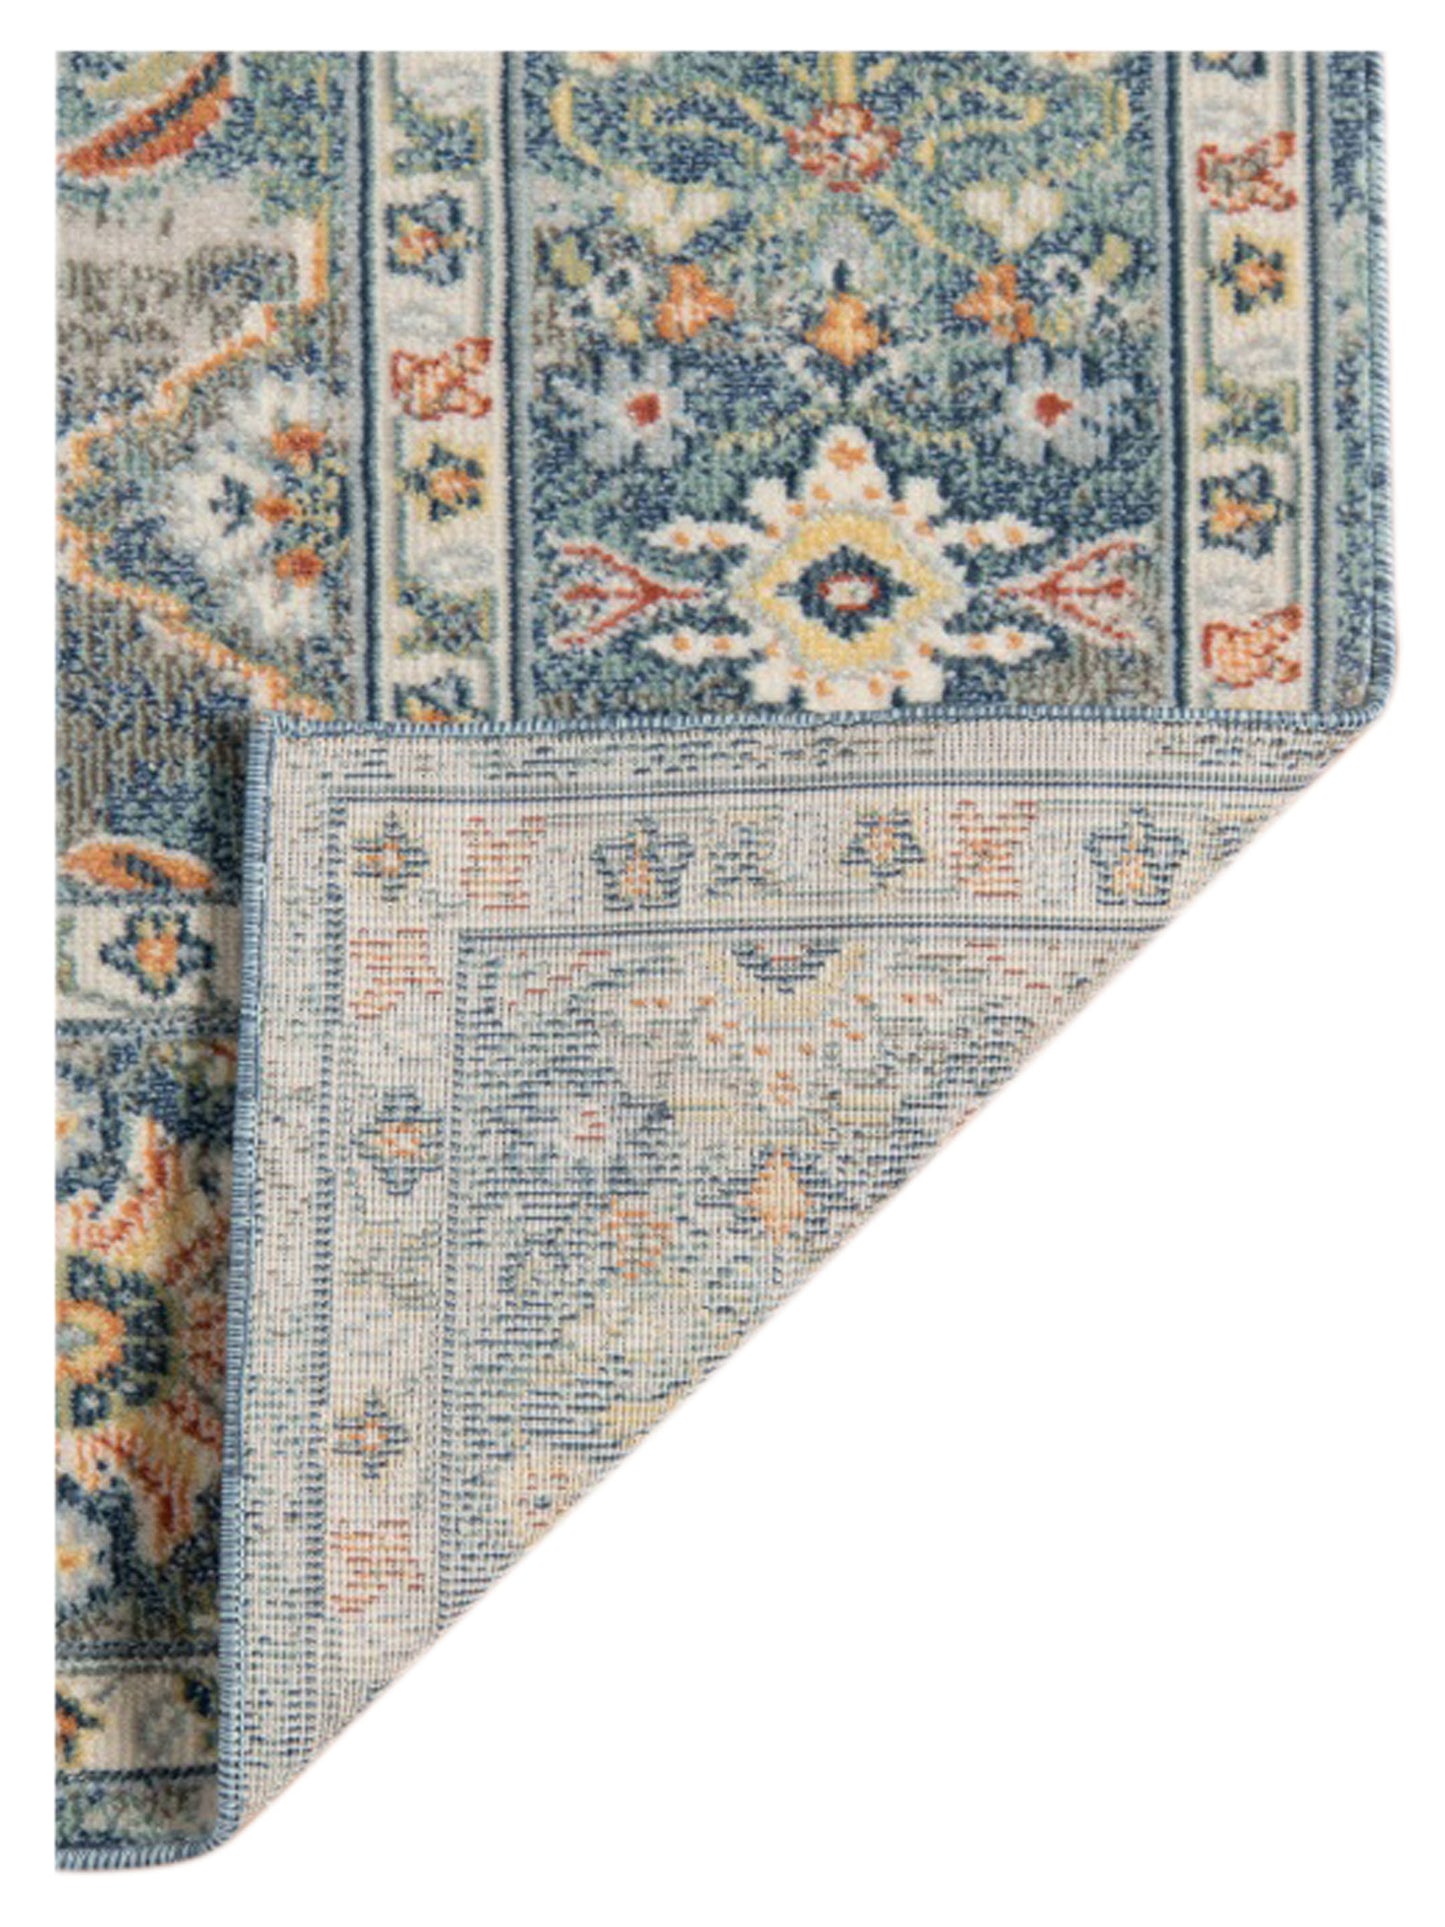 Limited Shay SF-407 BLUE  Traditional Machinemade Rug